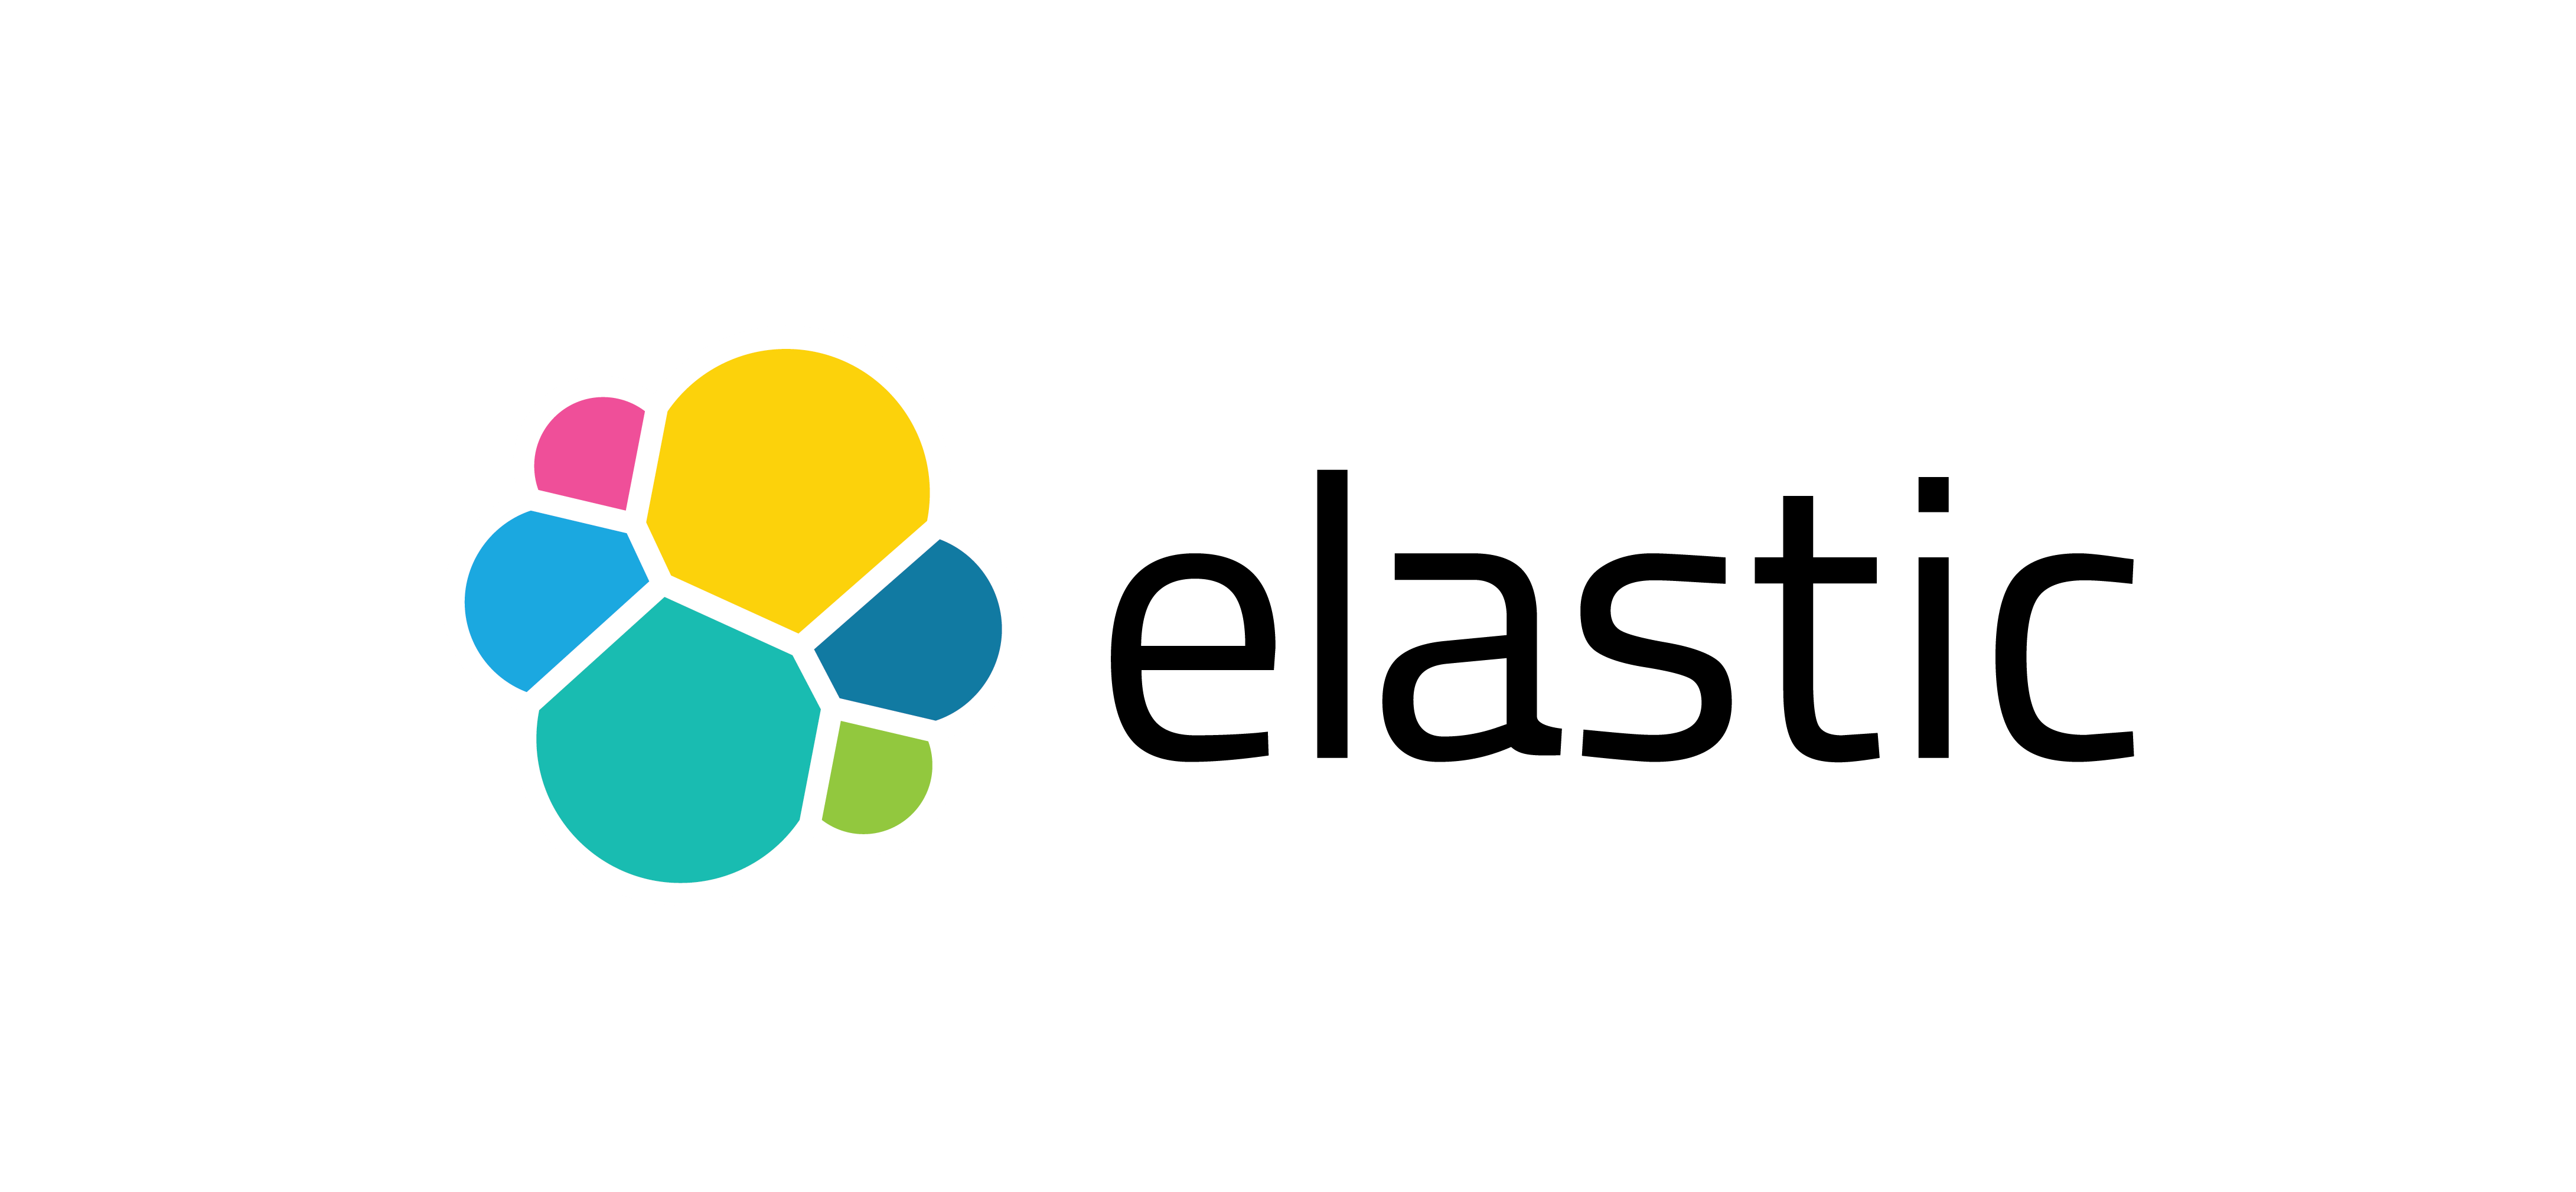 ElasticSearch Logo - Elasticsearch mappings and search queries